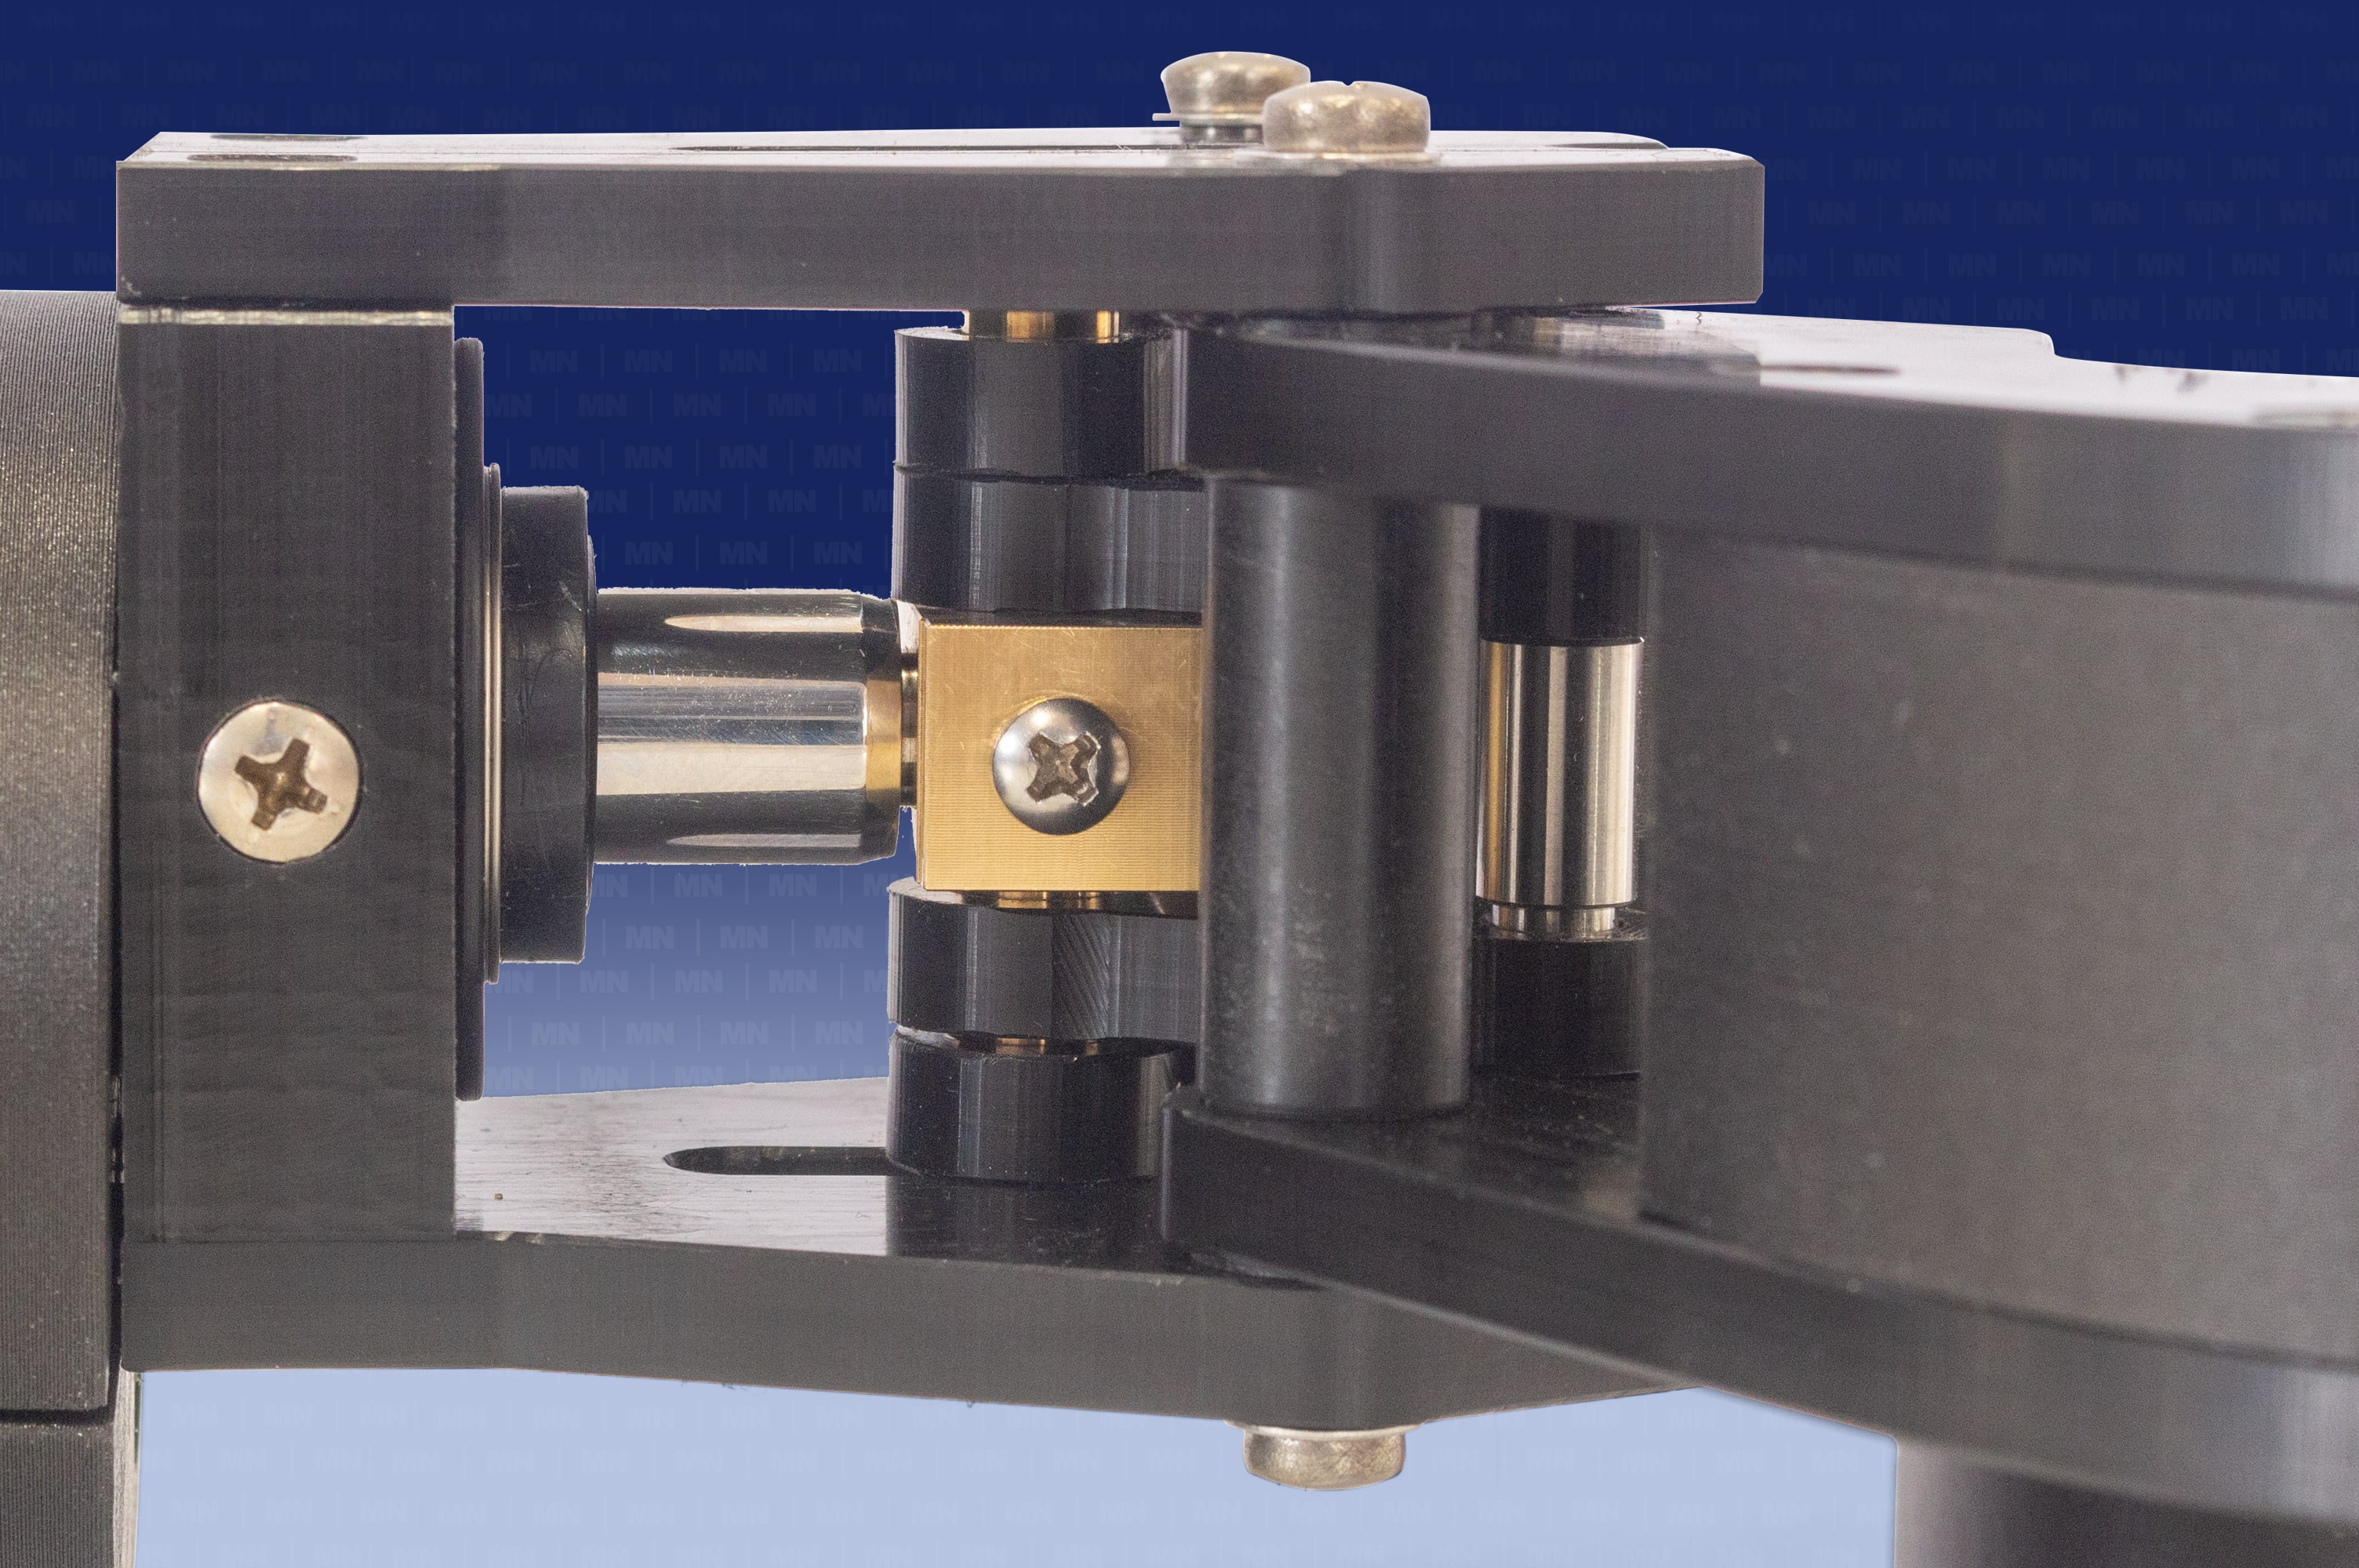 Rotating arm attachment heads are easily swapped out with a minimum of tools required.